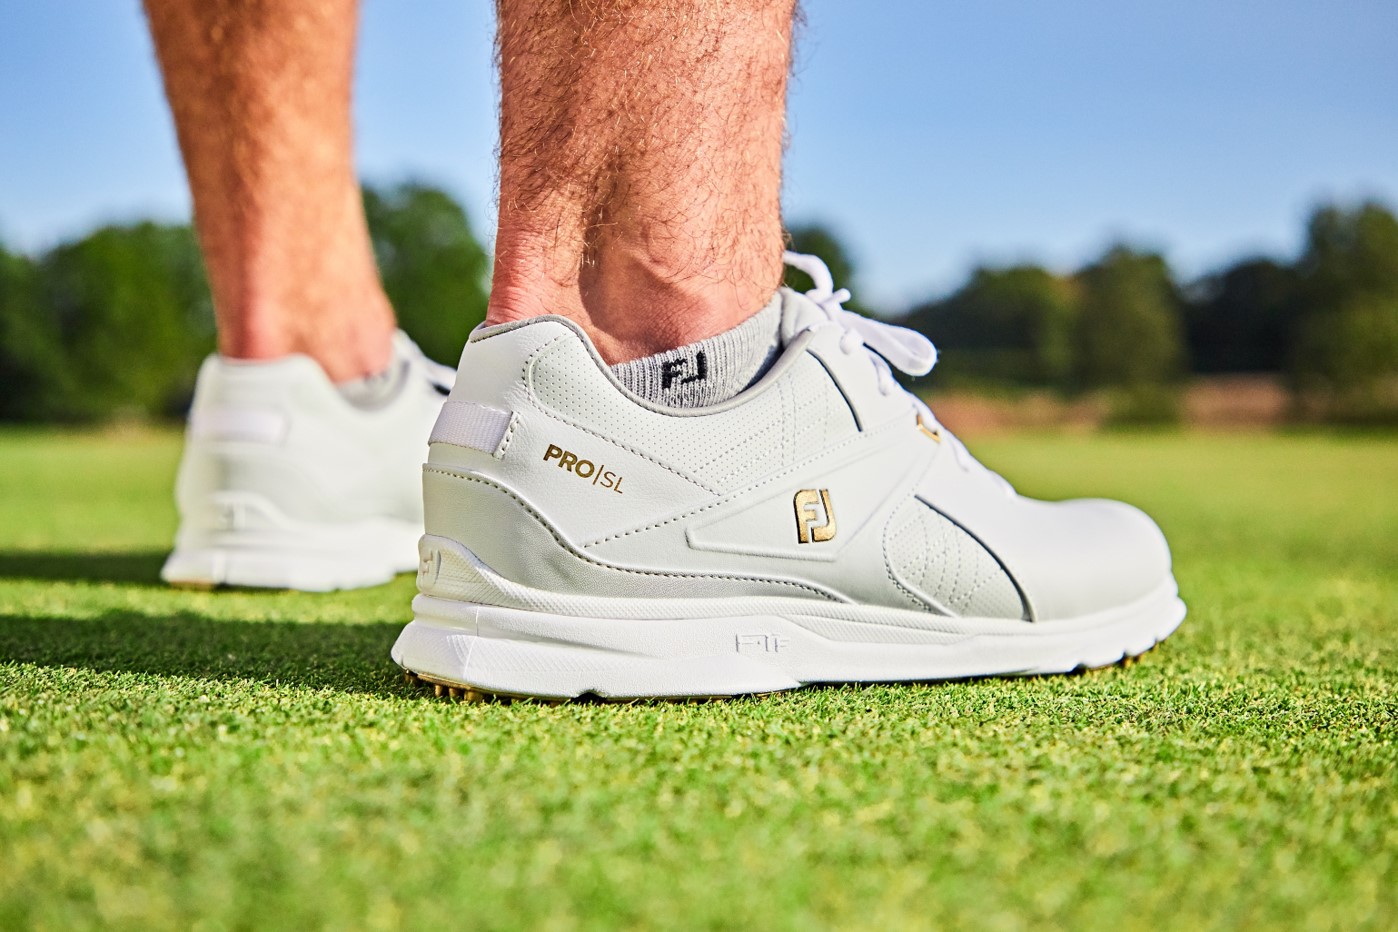 FootJoy celebrate continued success with launch of limited edition